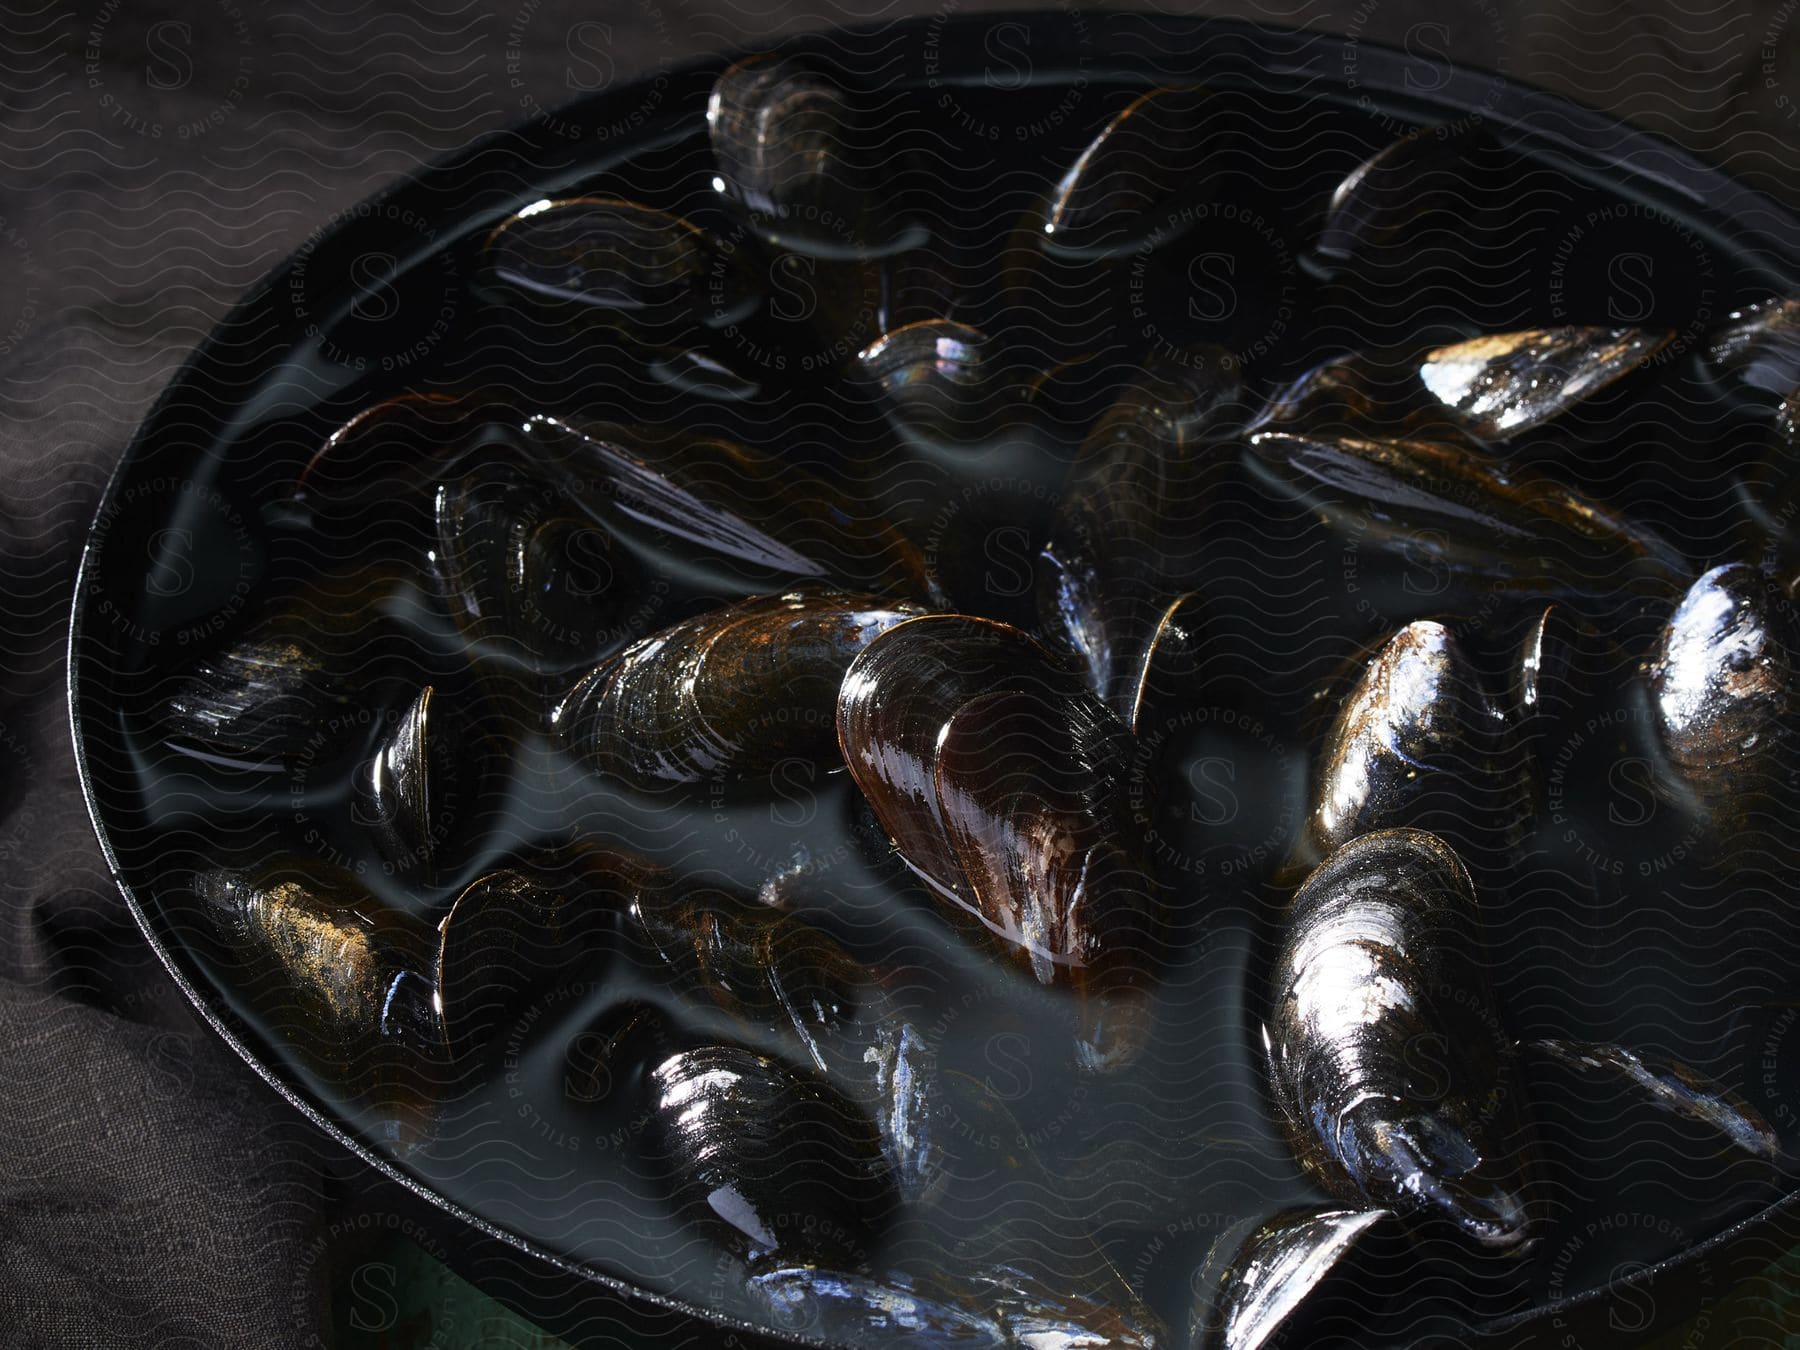 Pot of mussels filled with water on a grey tablecloth